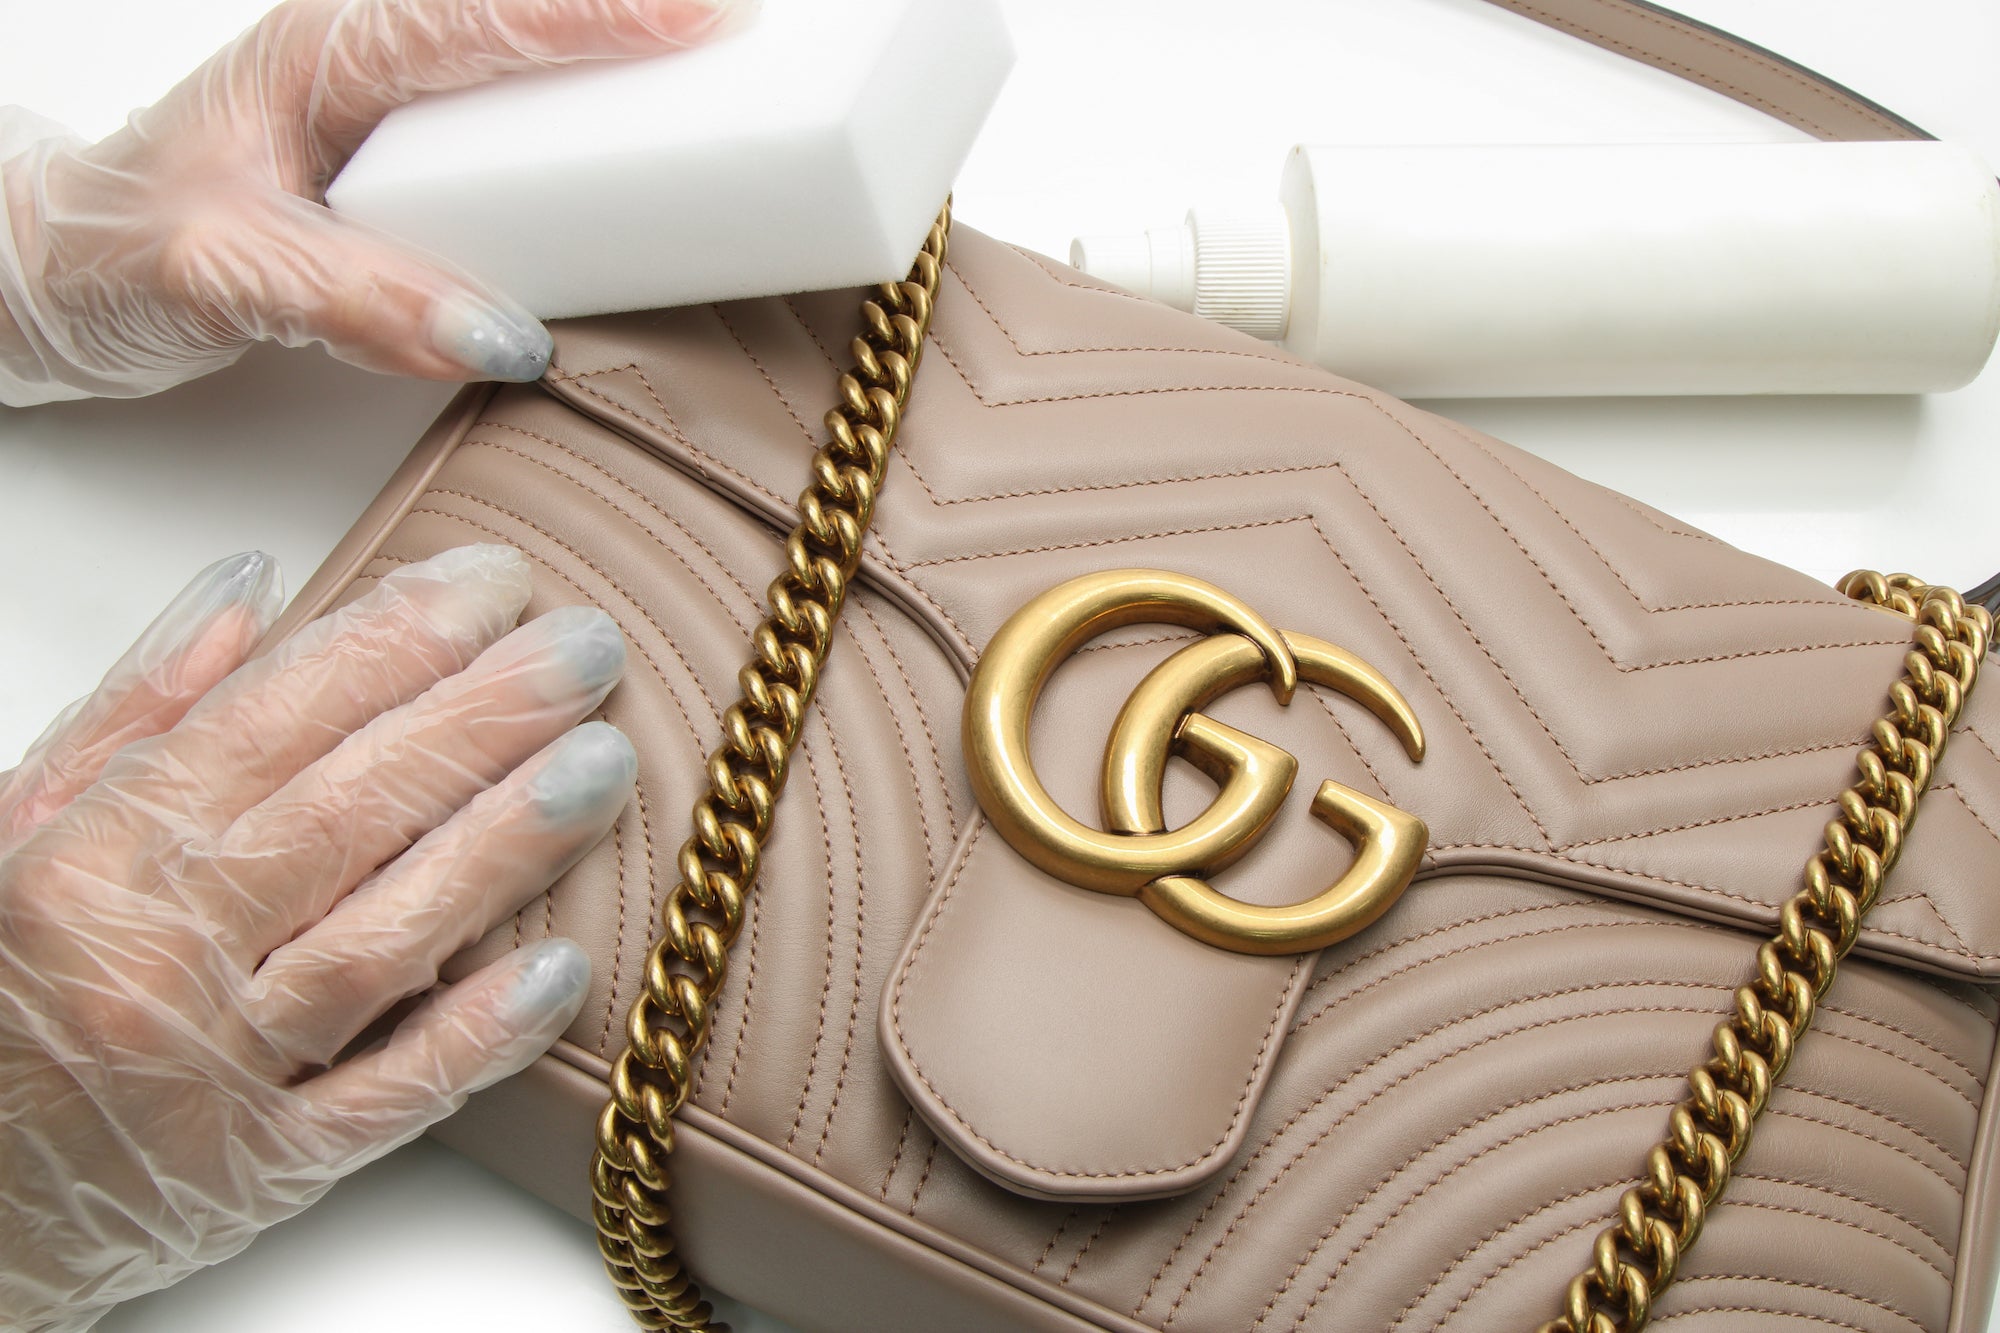 How to Properly Clean Your Designer Purse